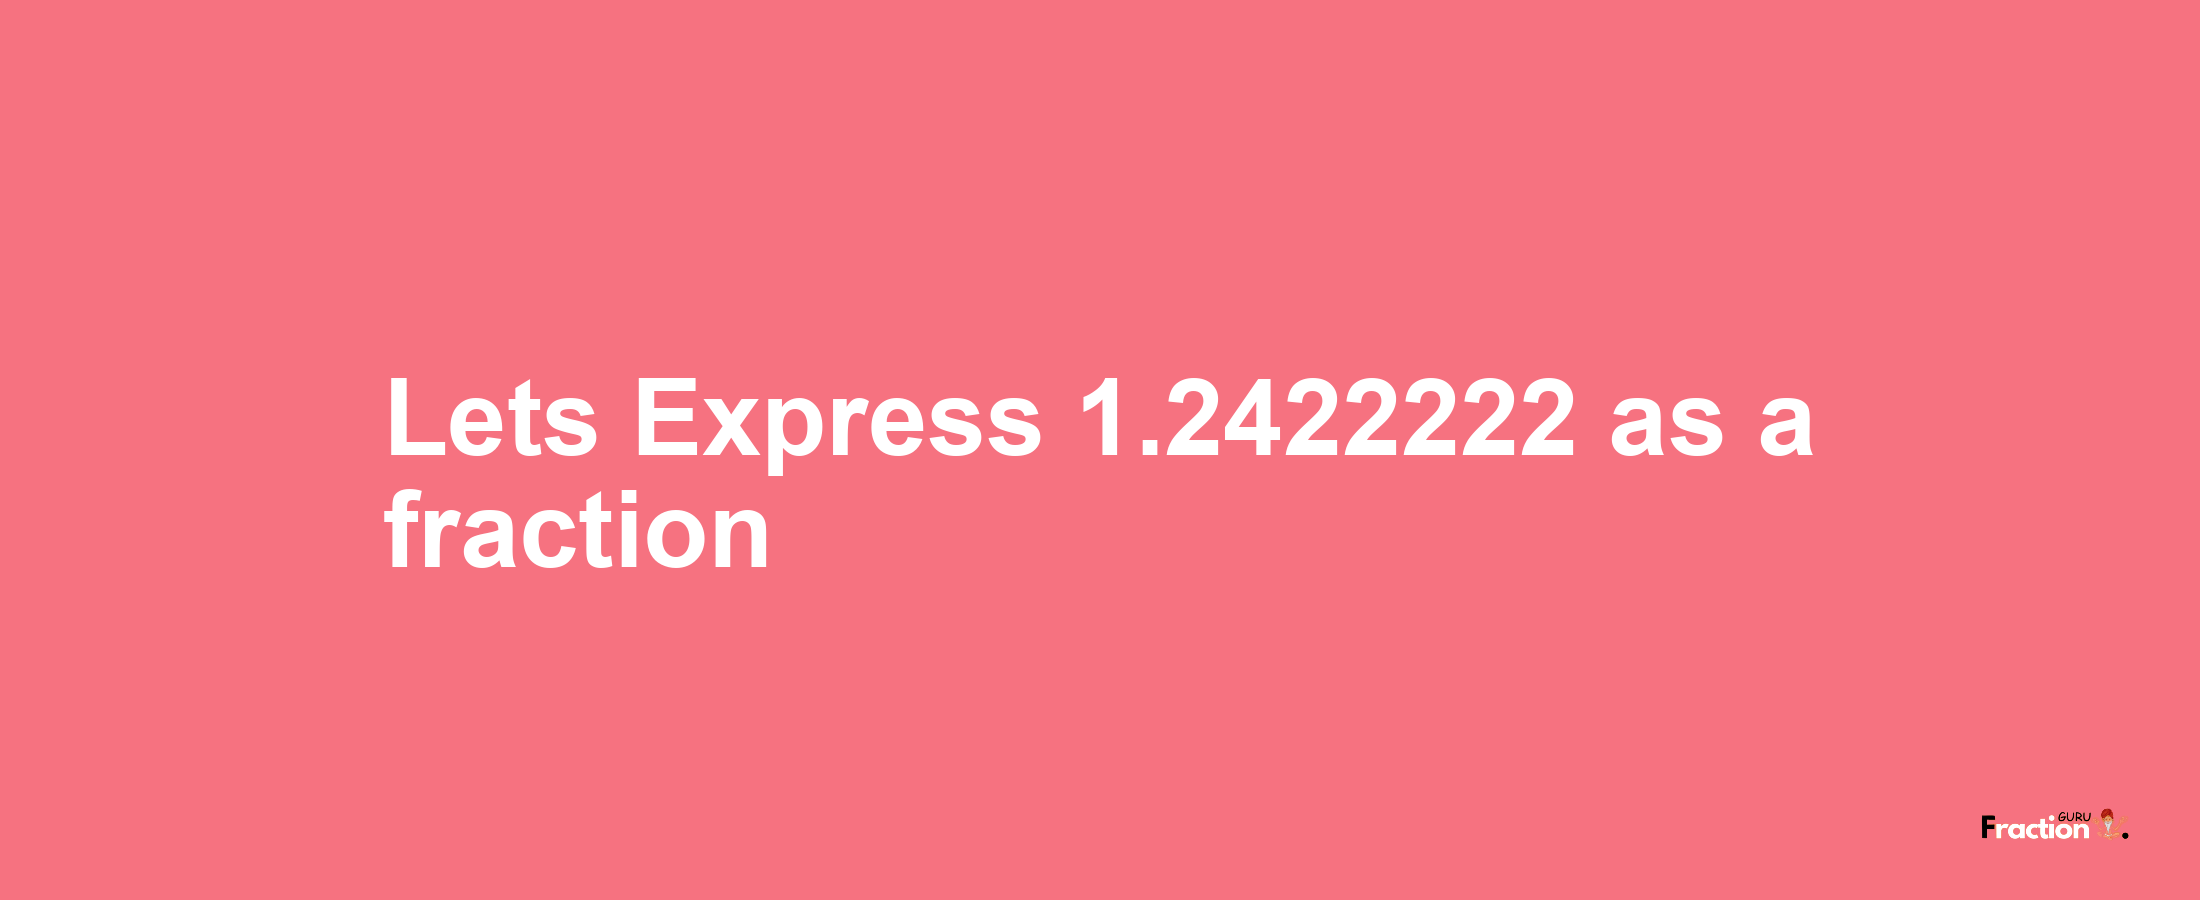 Lets Express 1.2422222 as afraction